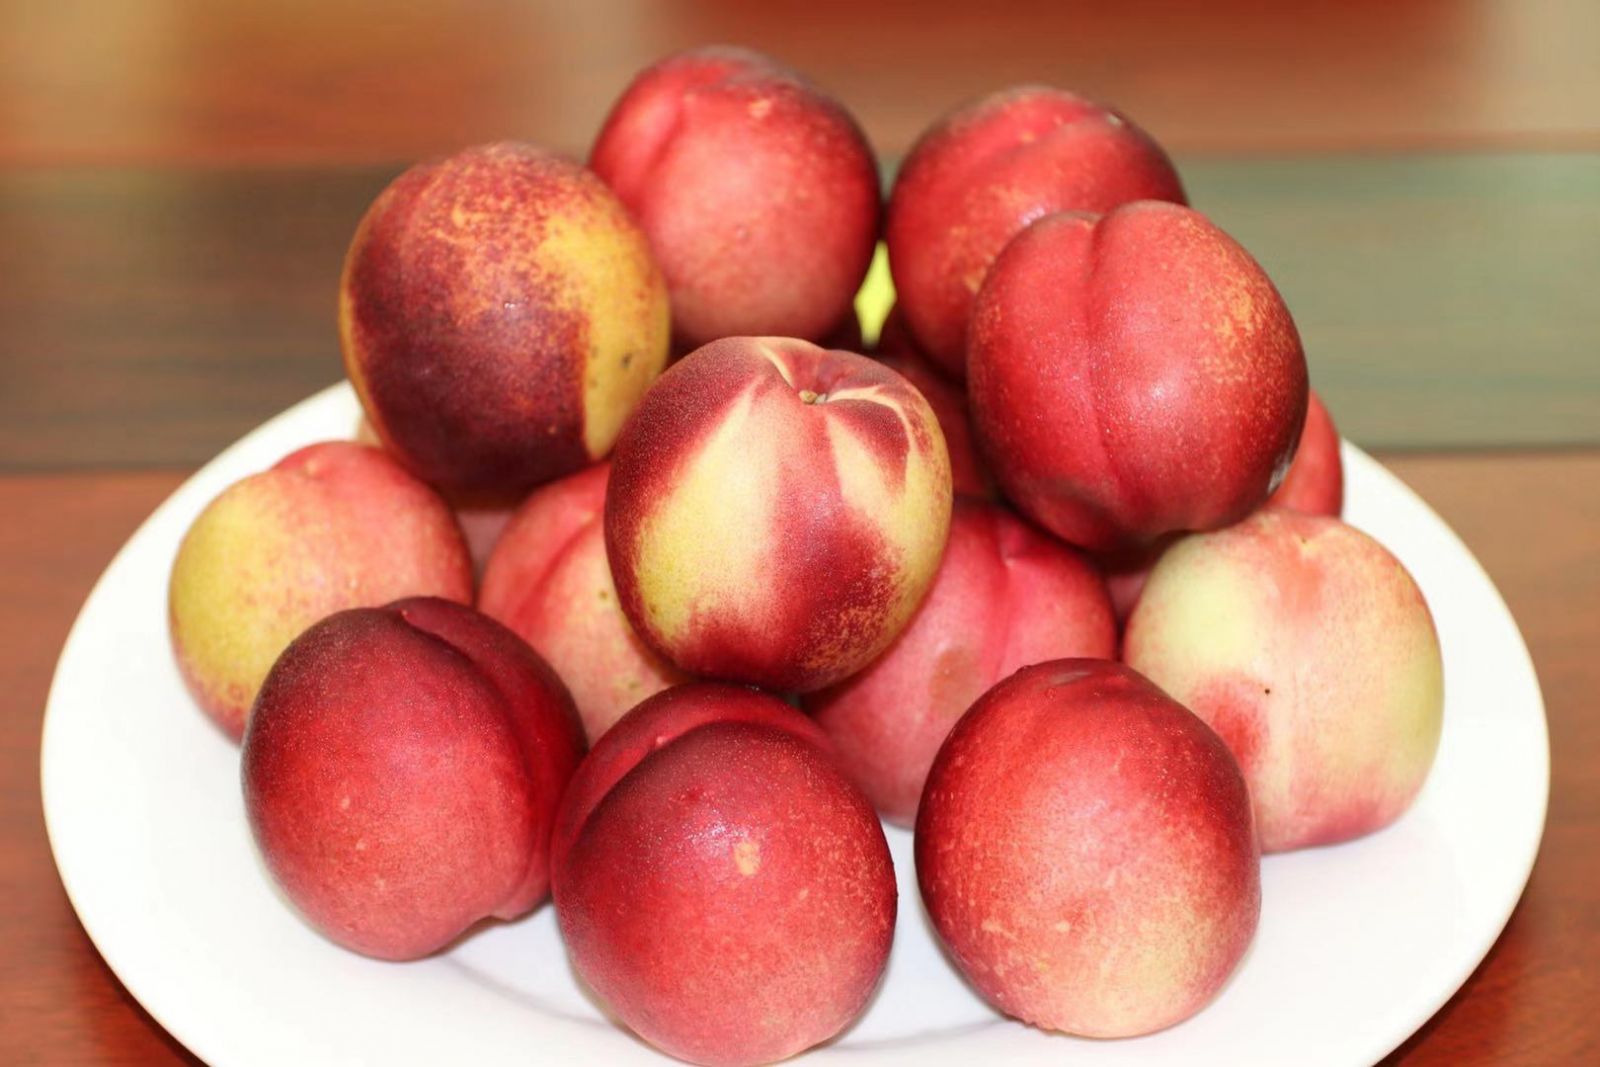 Chilean nectarines with sugar spots